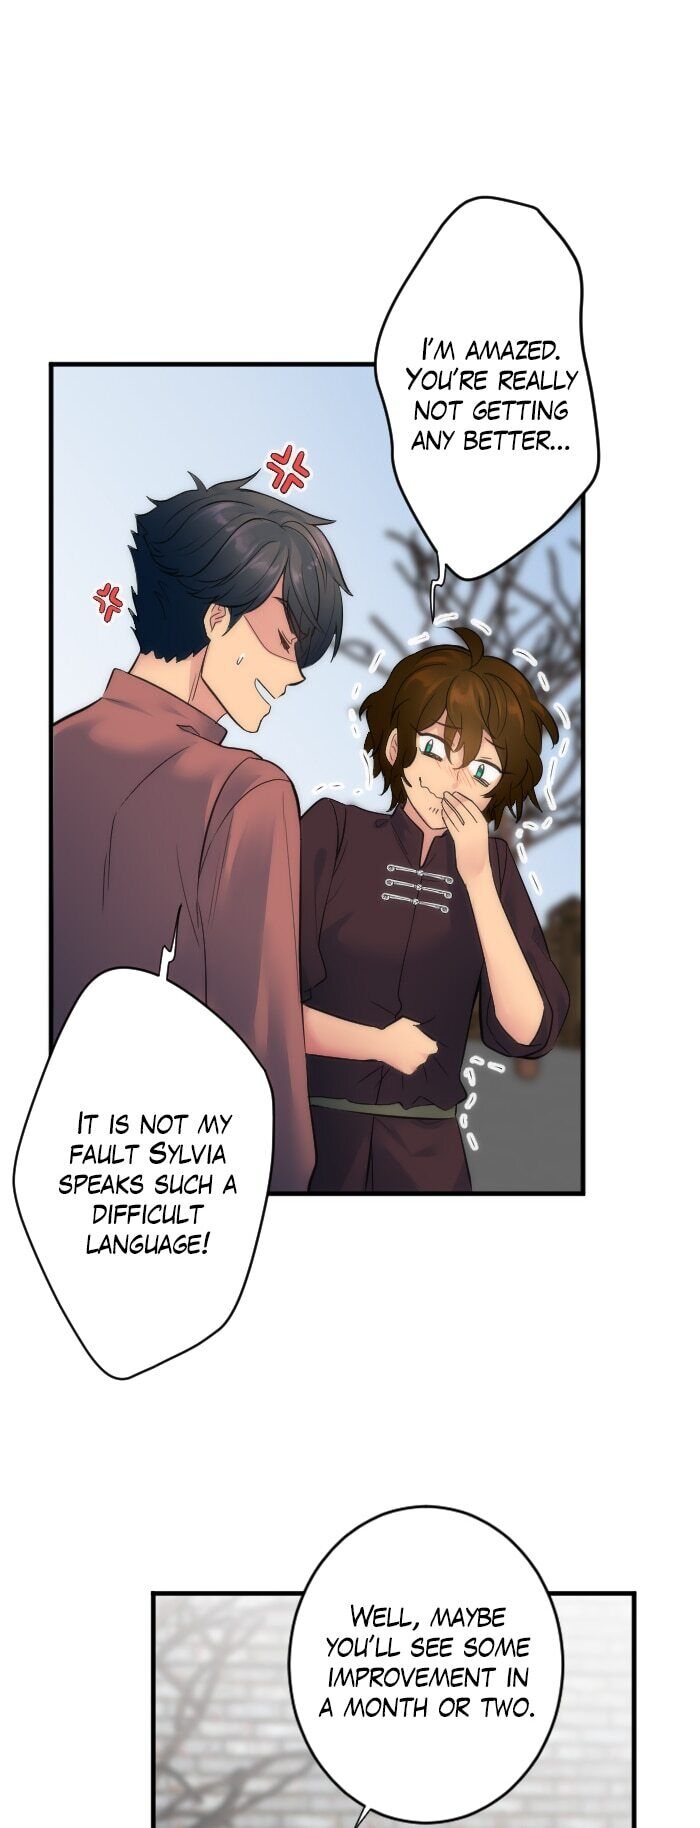 The Dragon Prince’s Bride chapter 63